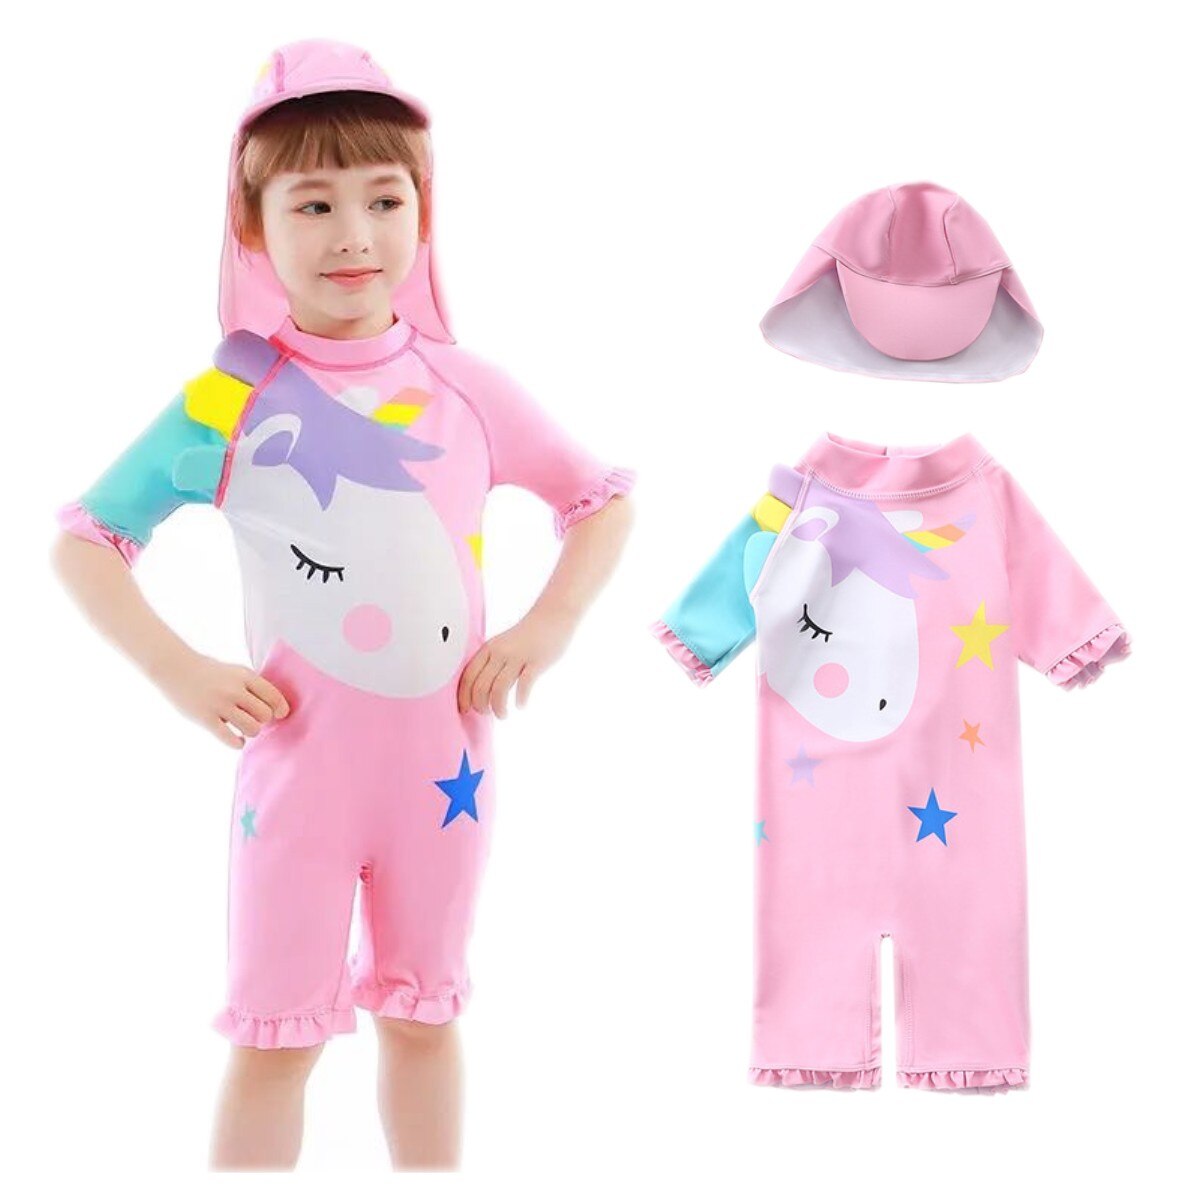 UPF 50+ Long Short Sleeves Quick Dry Swimwear 12M-8T Baby Toddler Girl Swimming Suit - Coco Potato - dresses and partywear for little girls